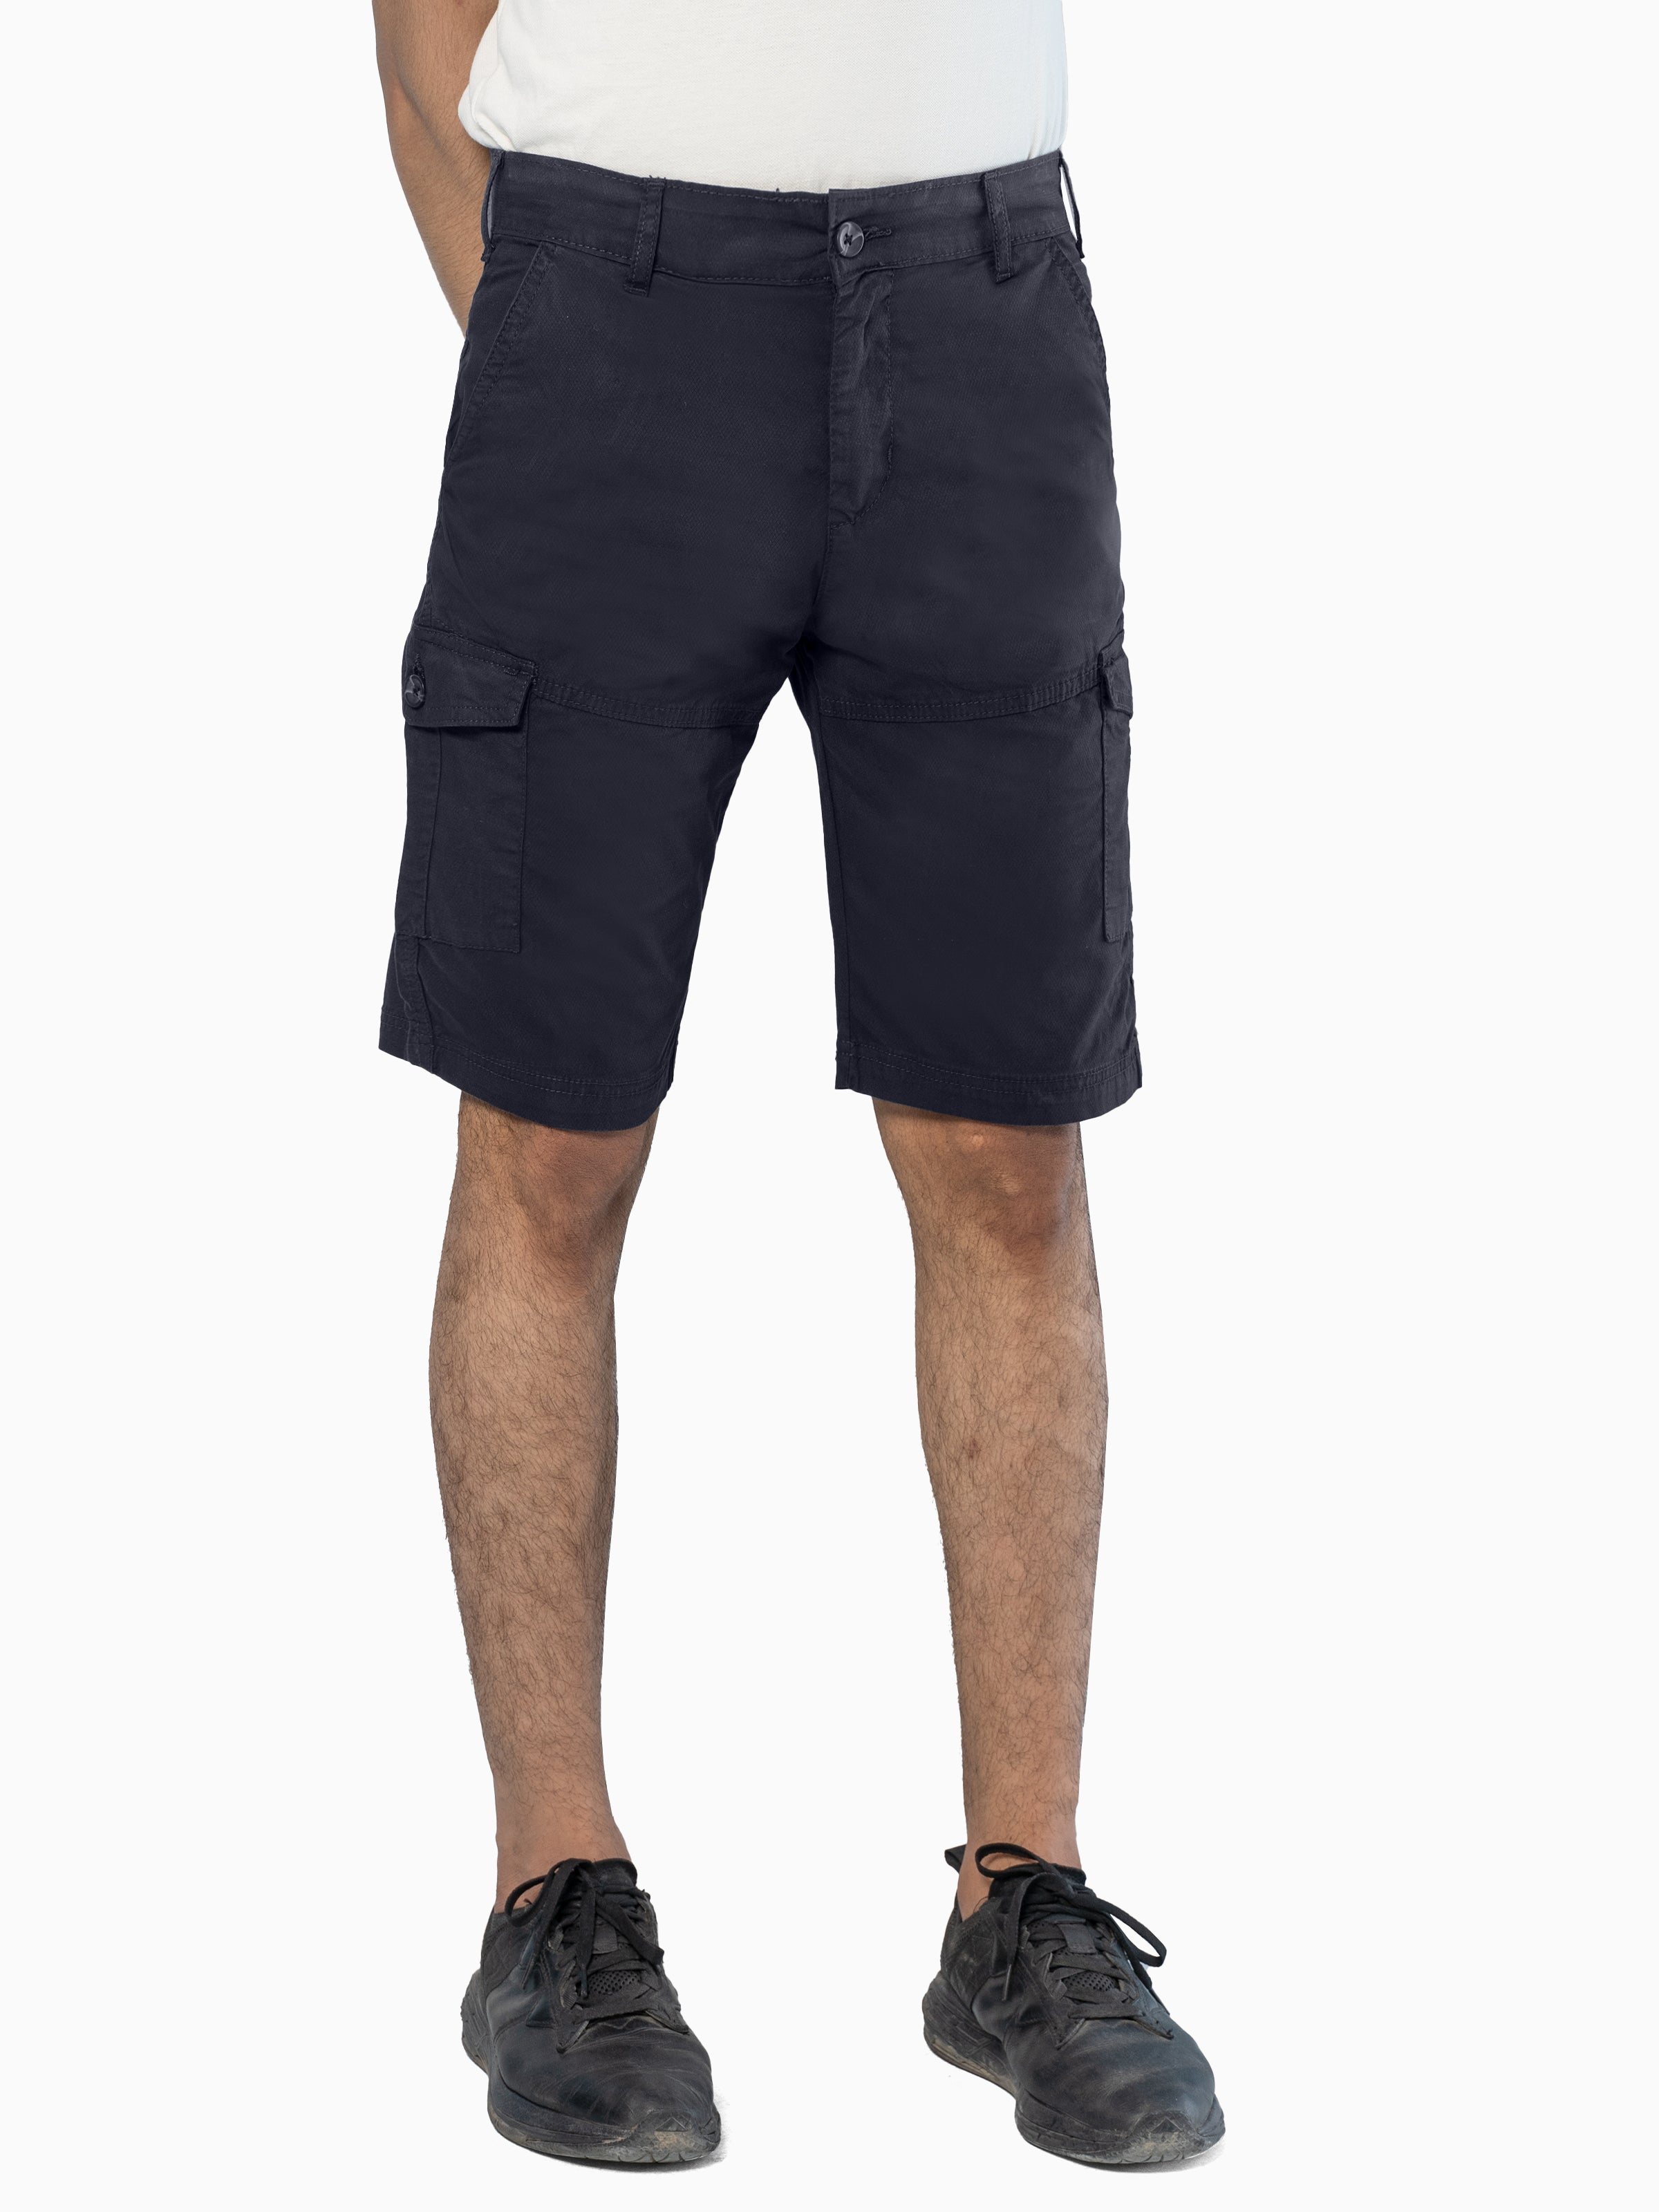 CASUAL SHORTS SMART FIT BLUE GREY